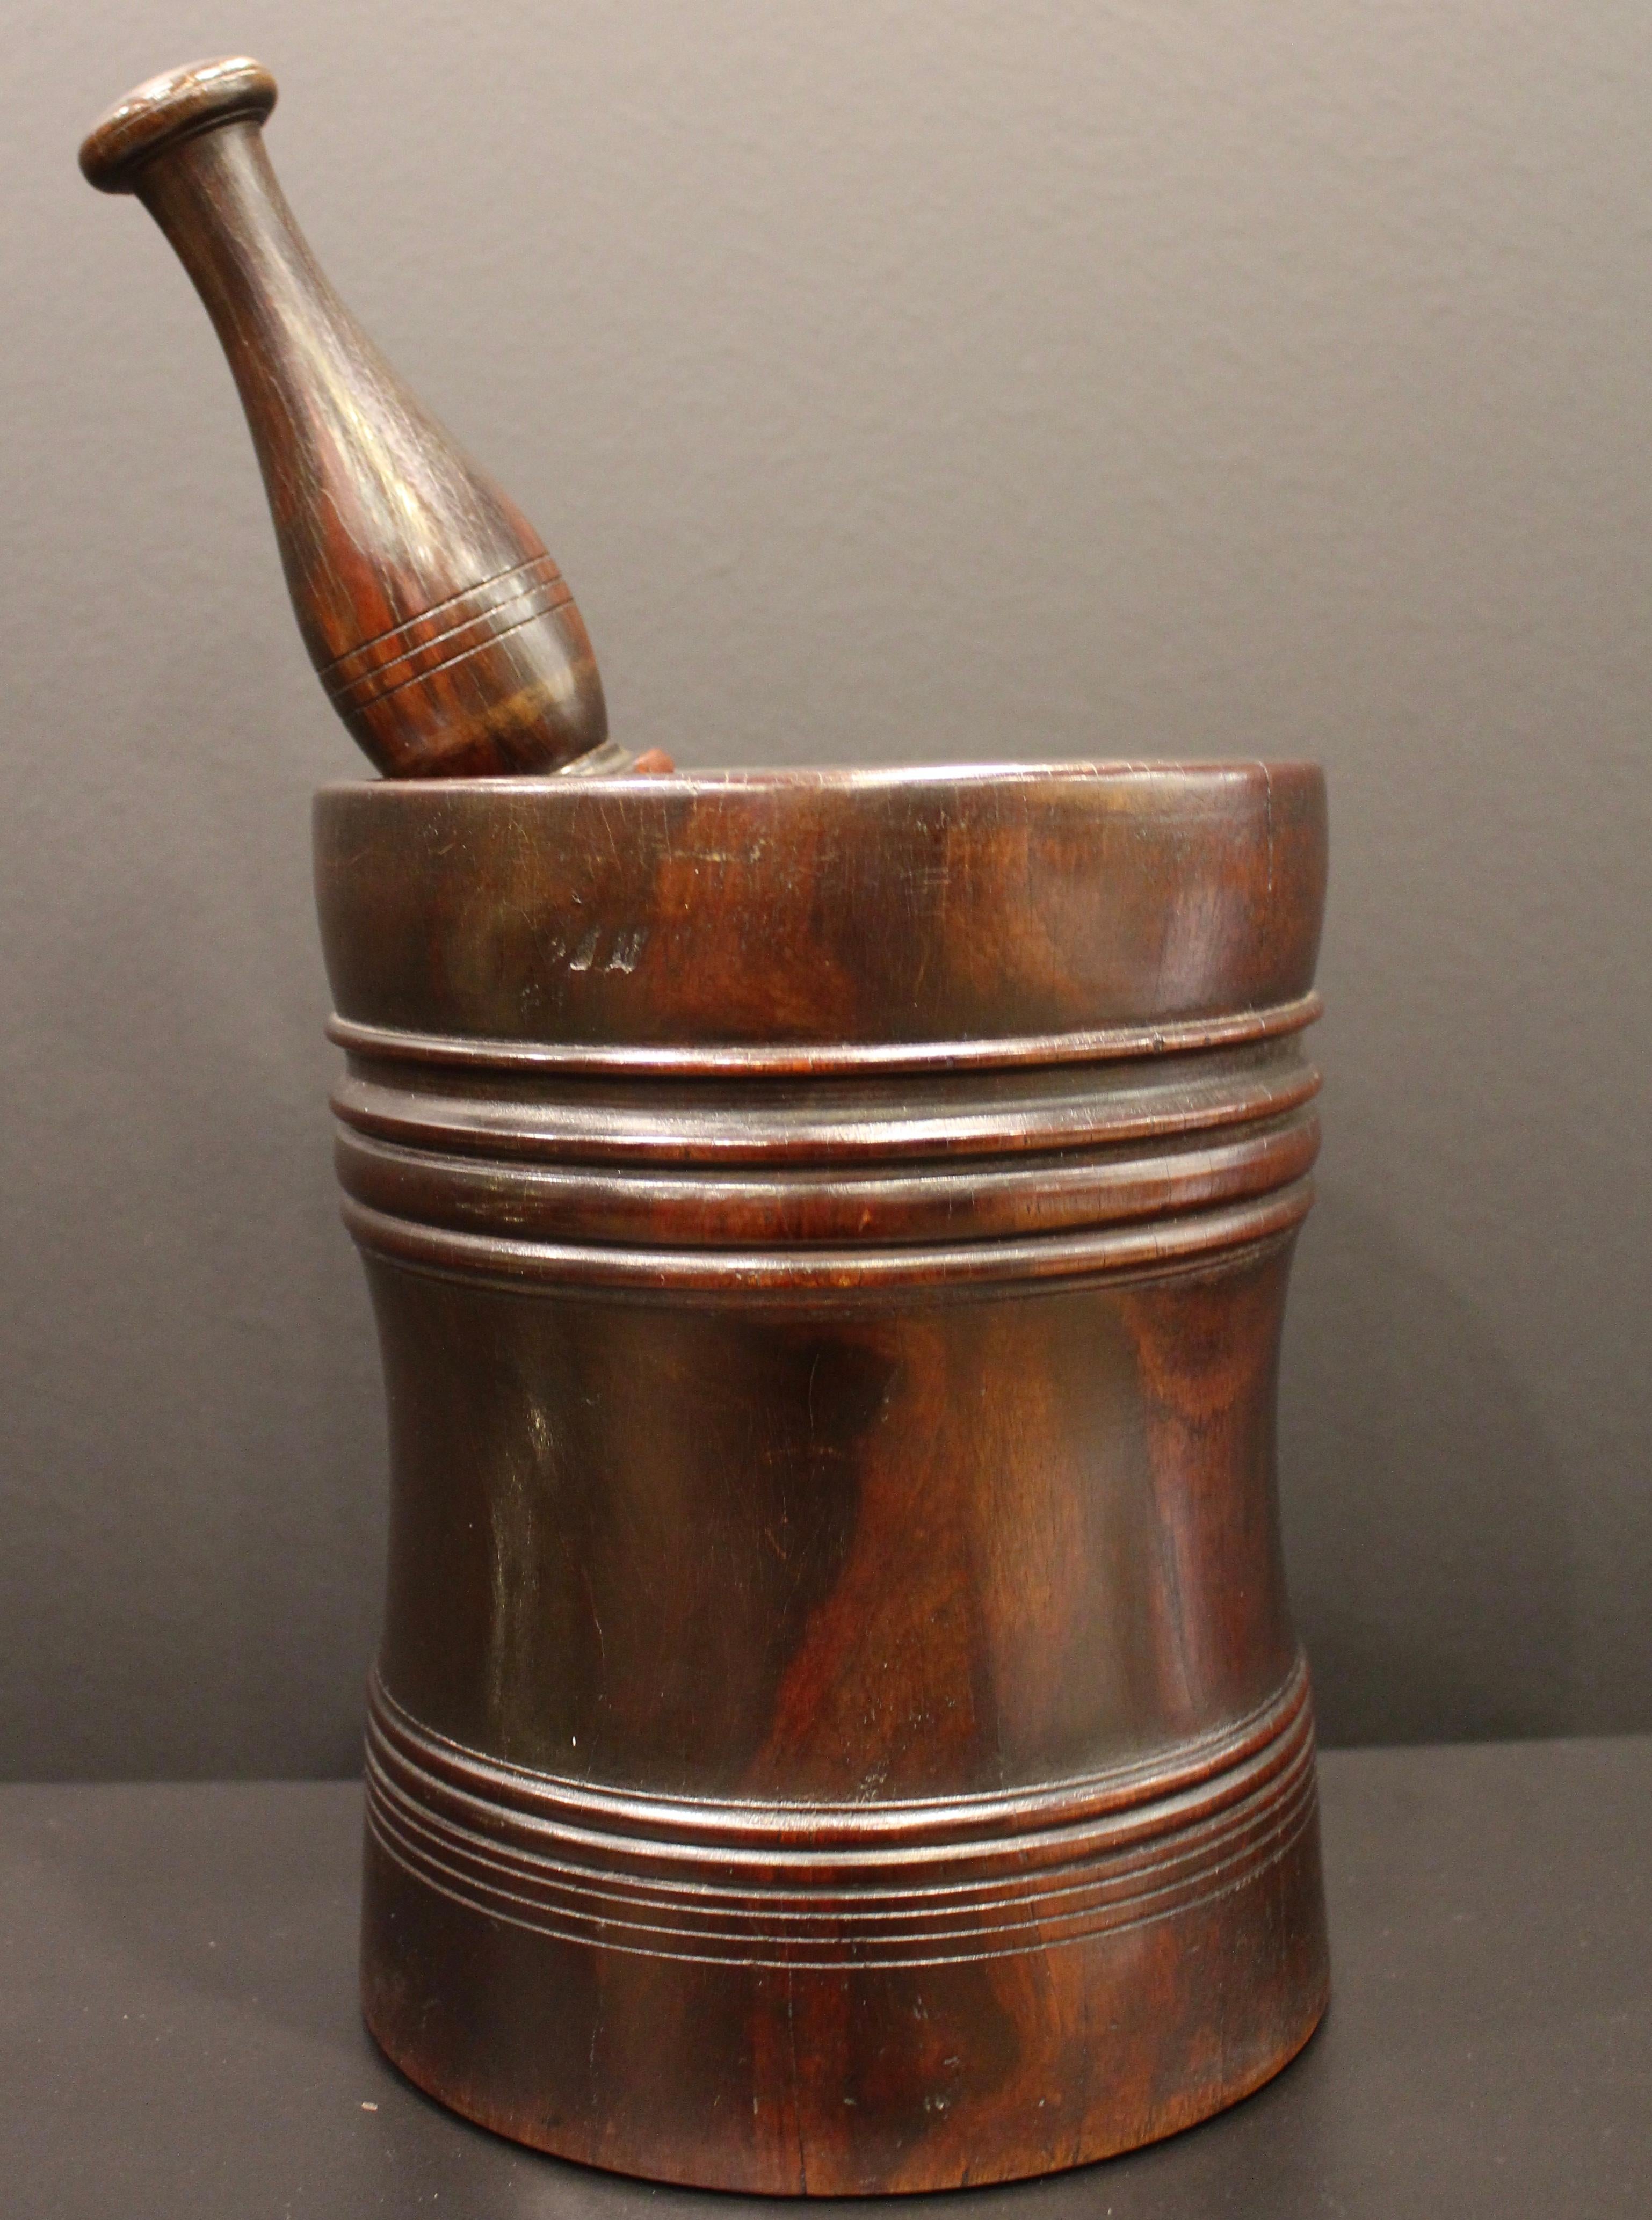 A magnificent early 18th century lignum vitae pestle and mortar.